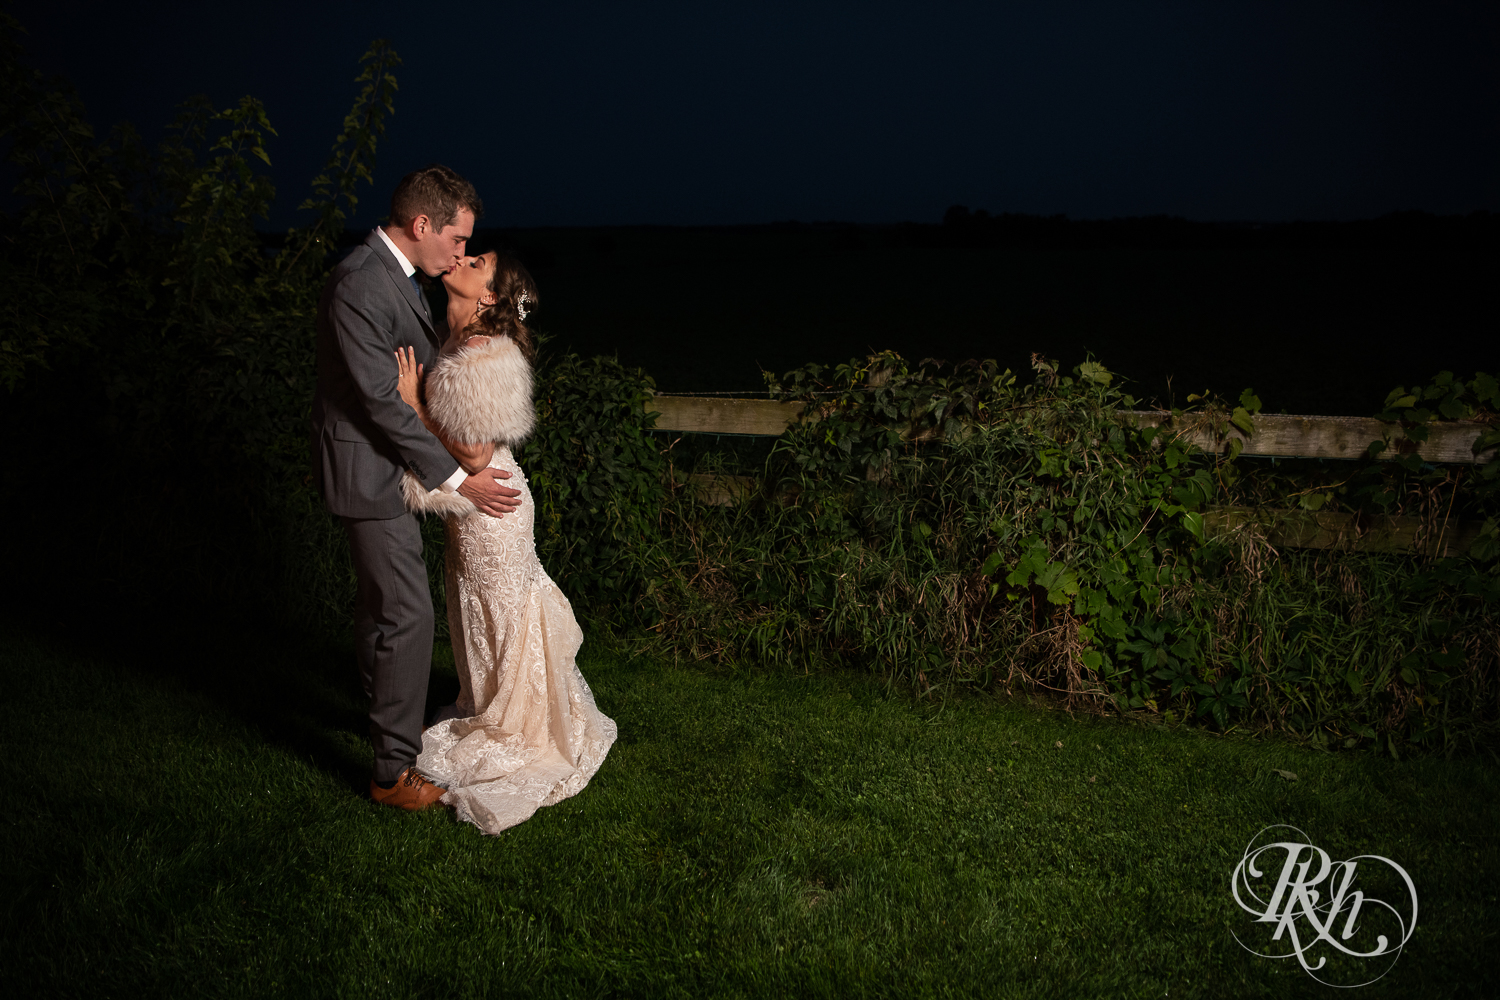 Bride smiles in fur stole and dress at night at Legacy Hills Farm in Welch, Minnesota.